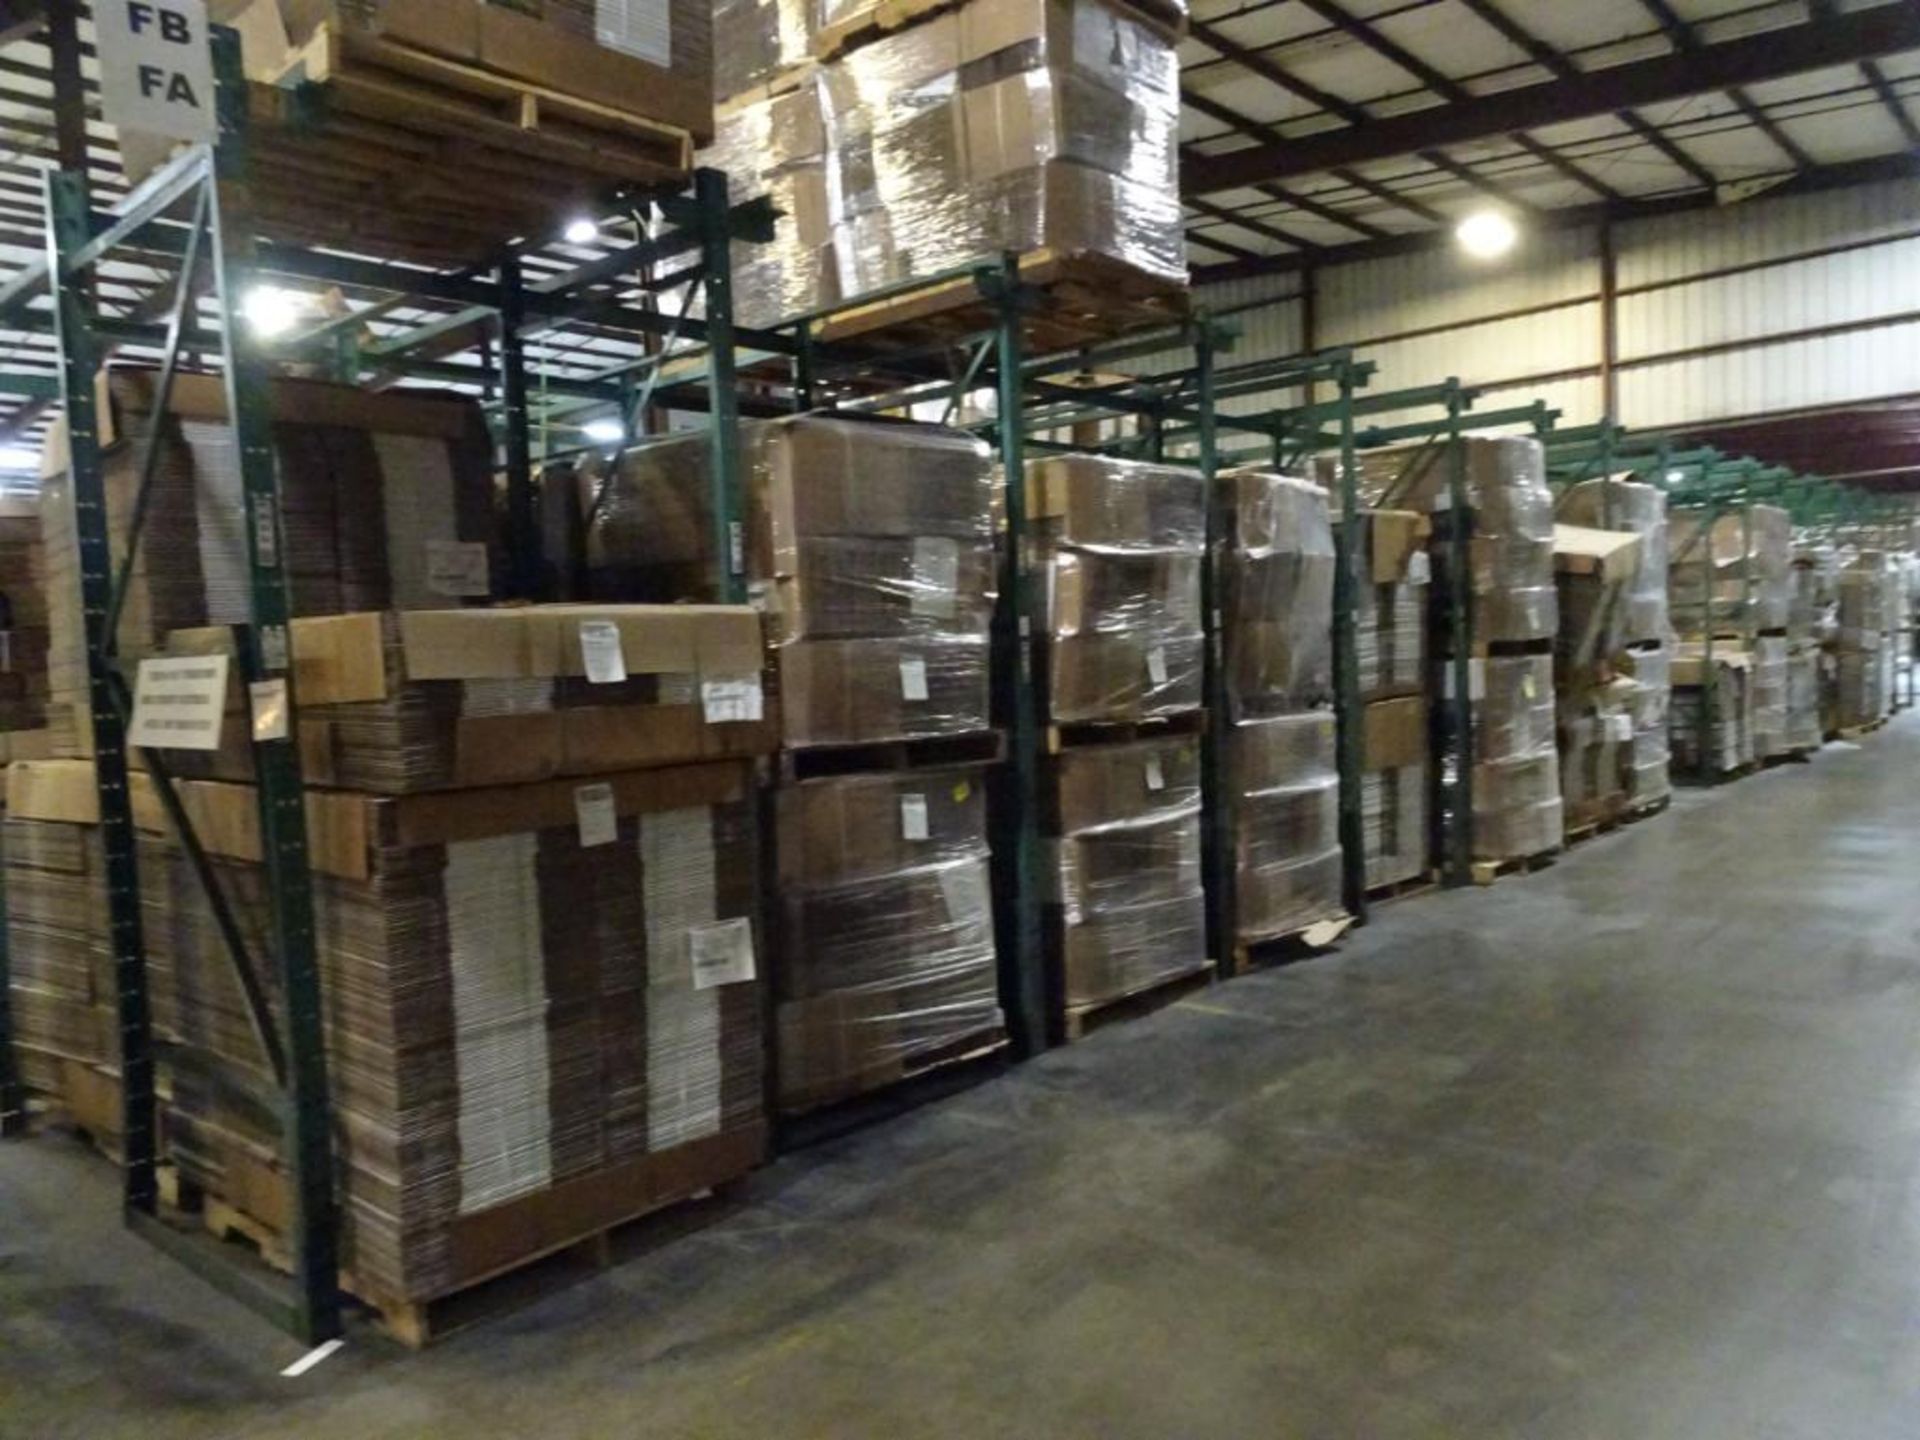 (8) Sections of Heavy Duty Pallet Racking Consisting of: (9) 10' Uprights, (32) 8' Crossbeams